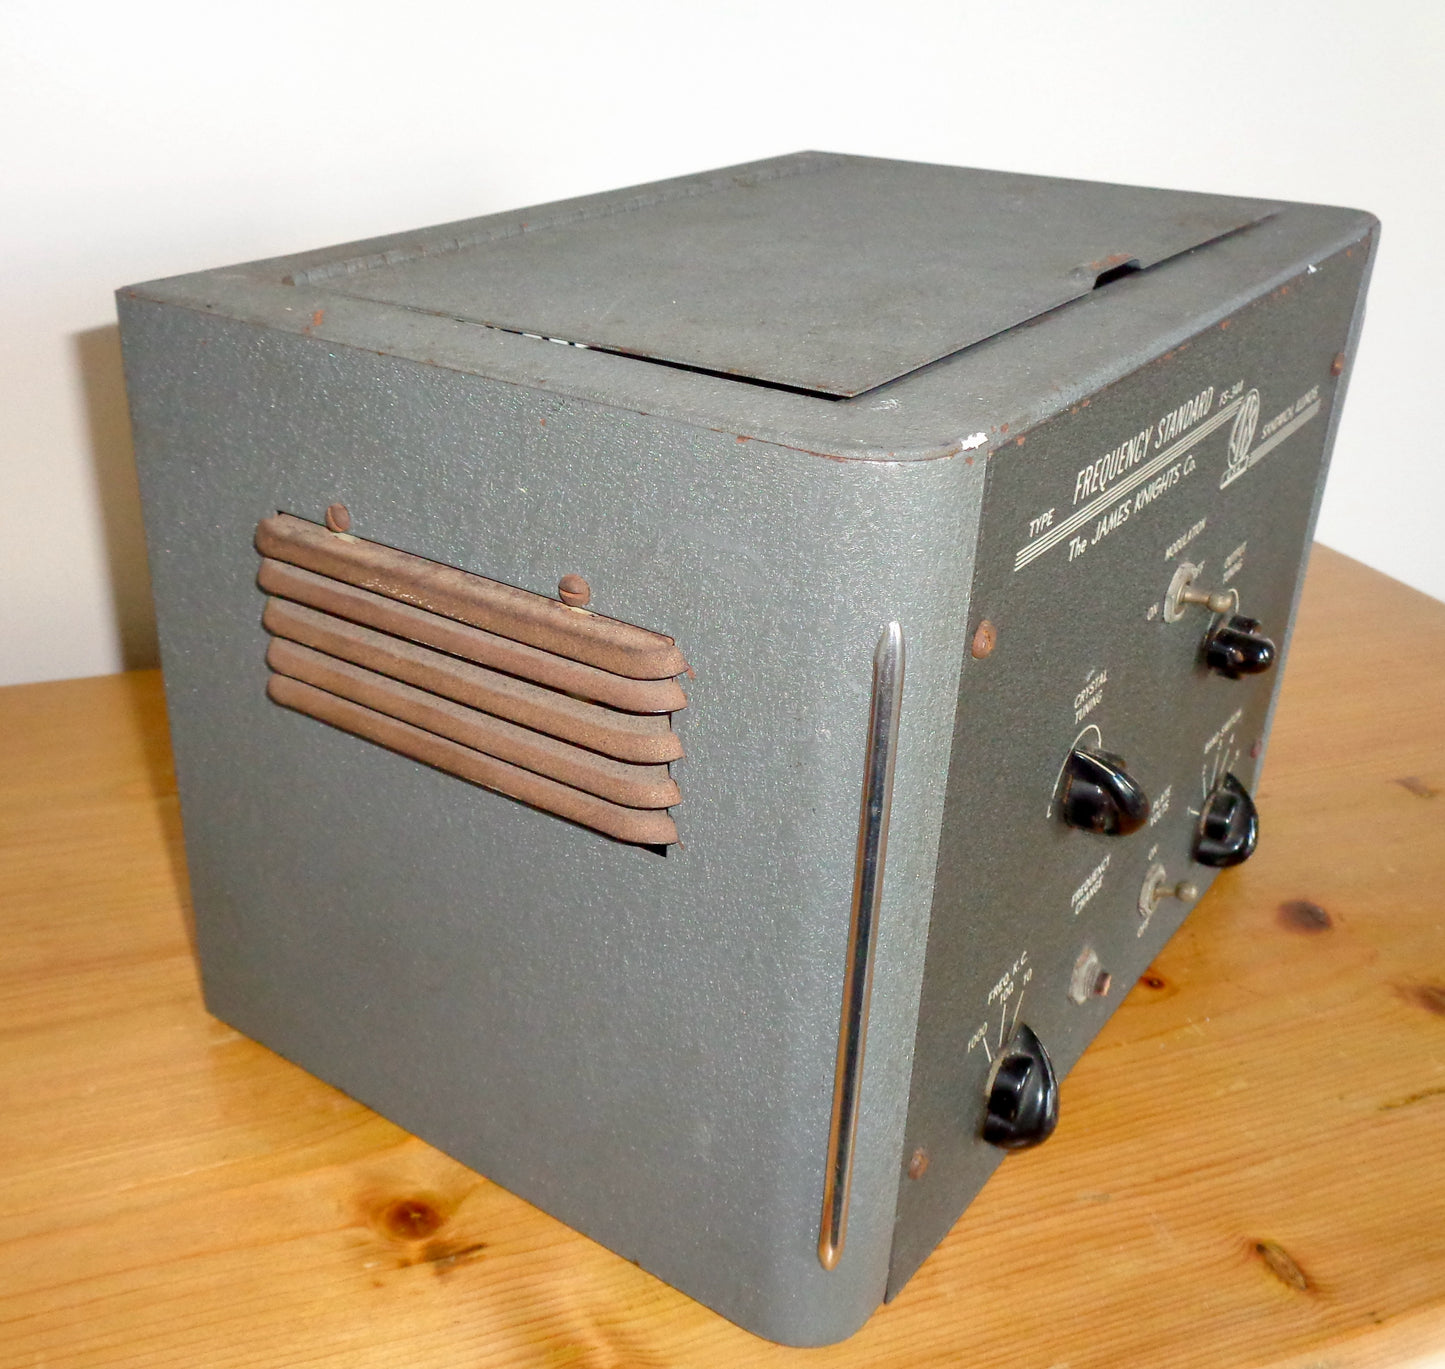 1940s The James Knight Company Frequency Standard FS344 In Need Of Restoration